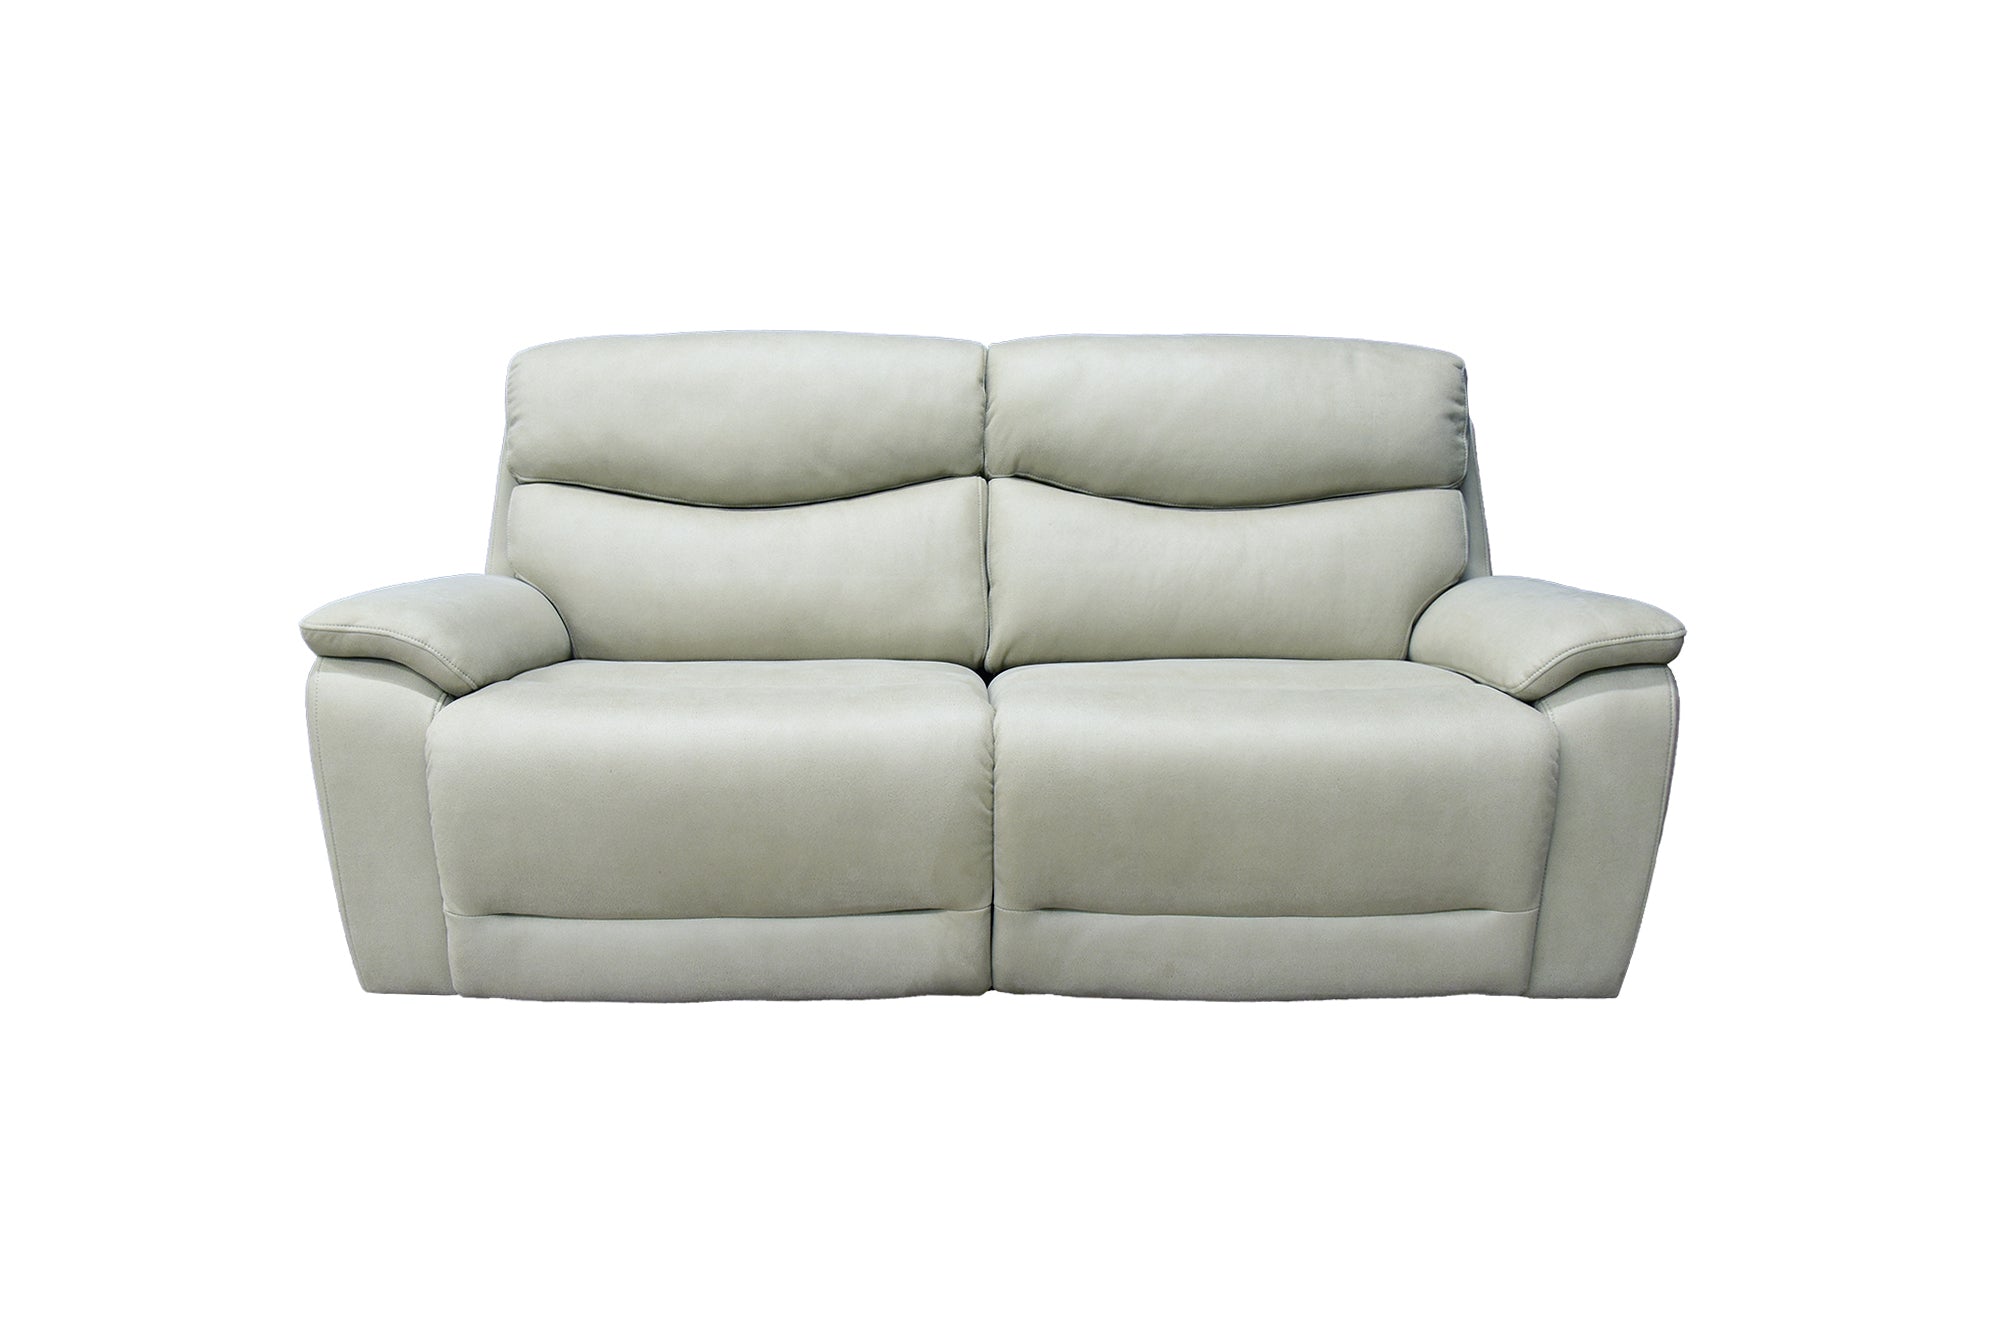 Nice 3 Seater Sofa with Power Recliners